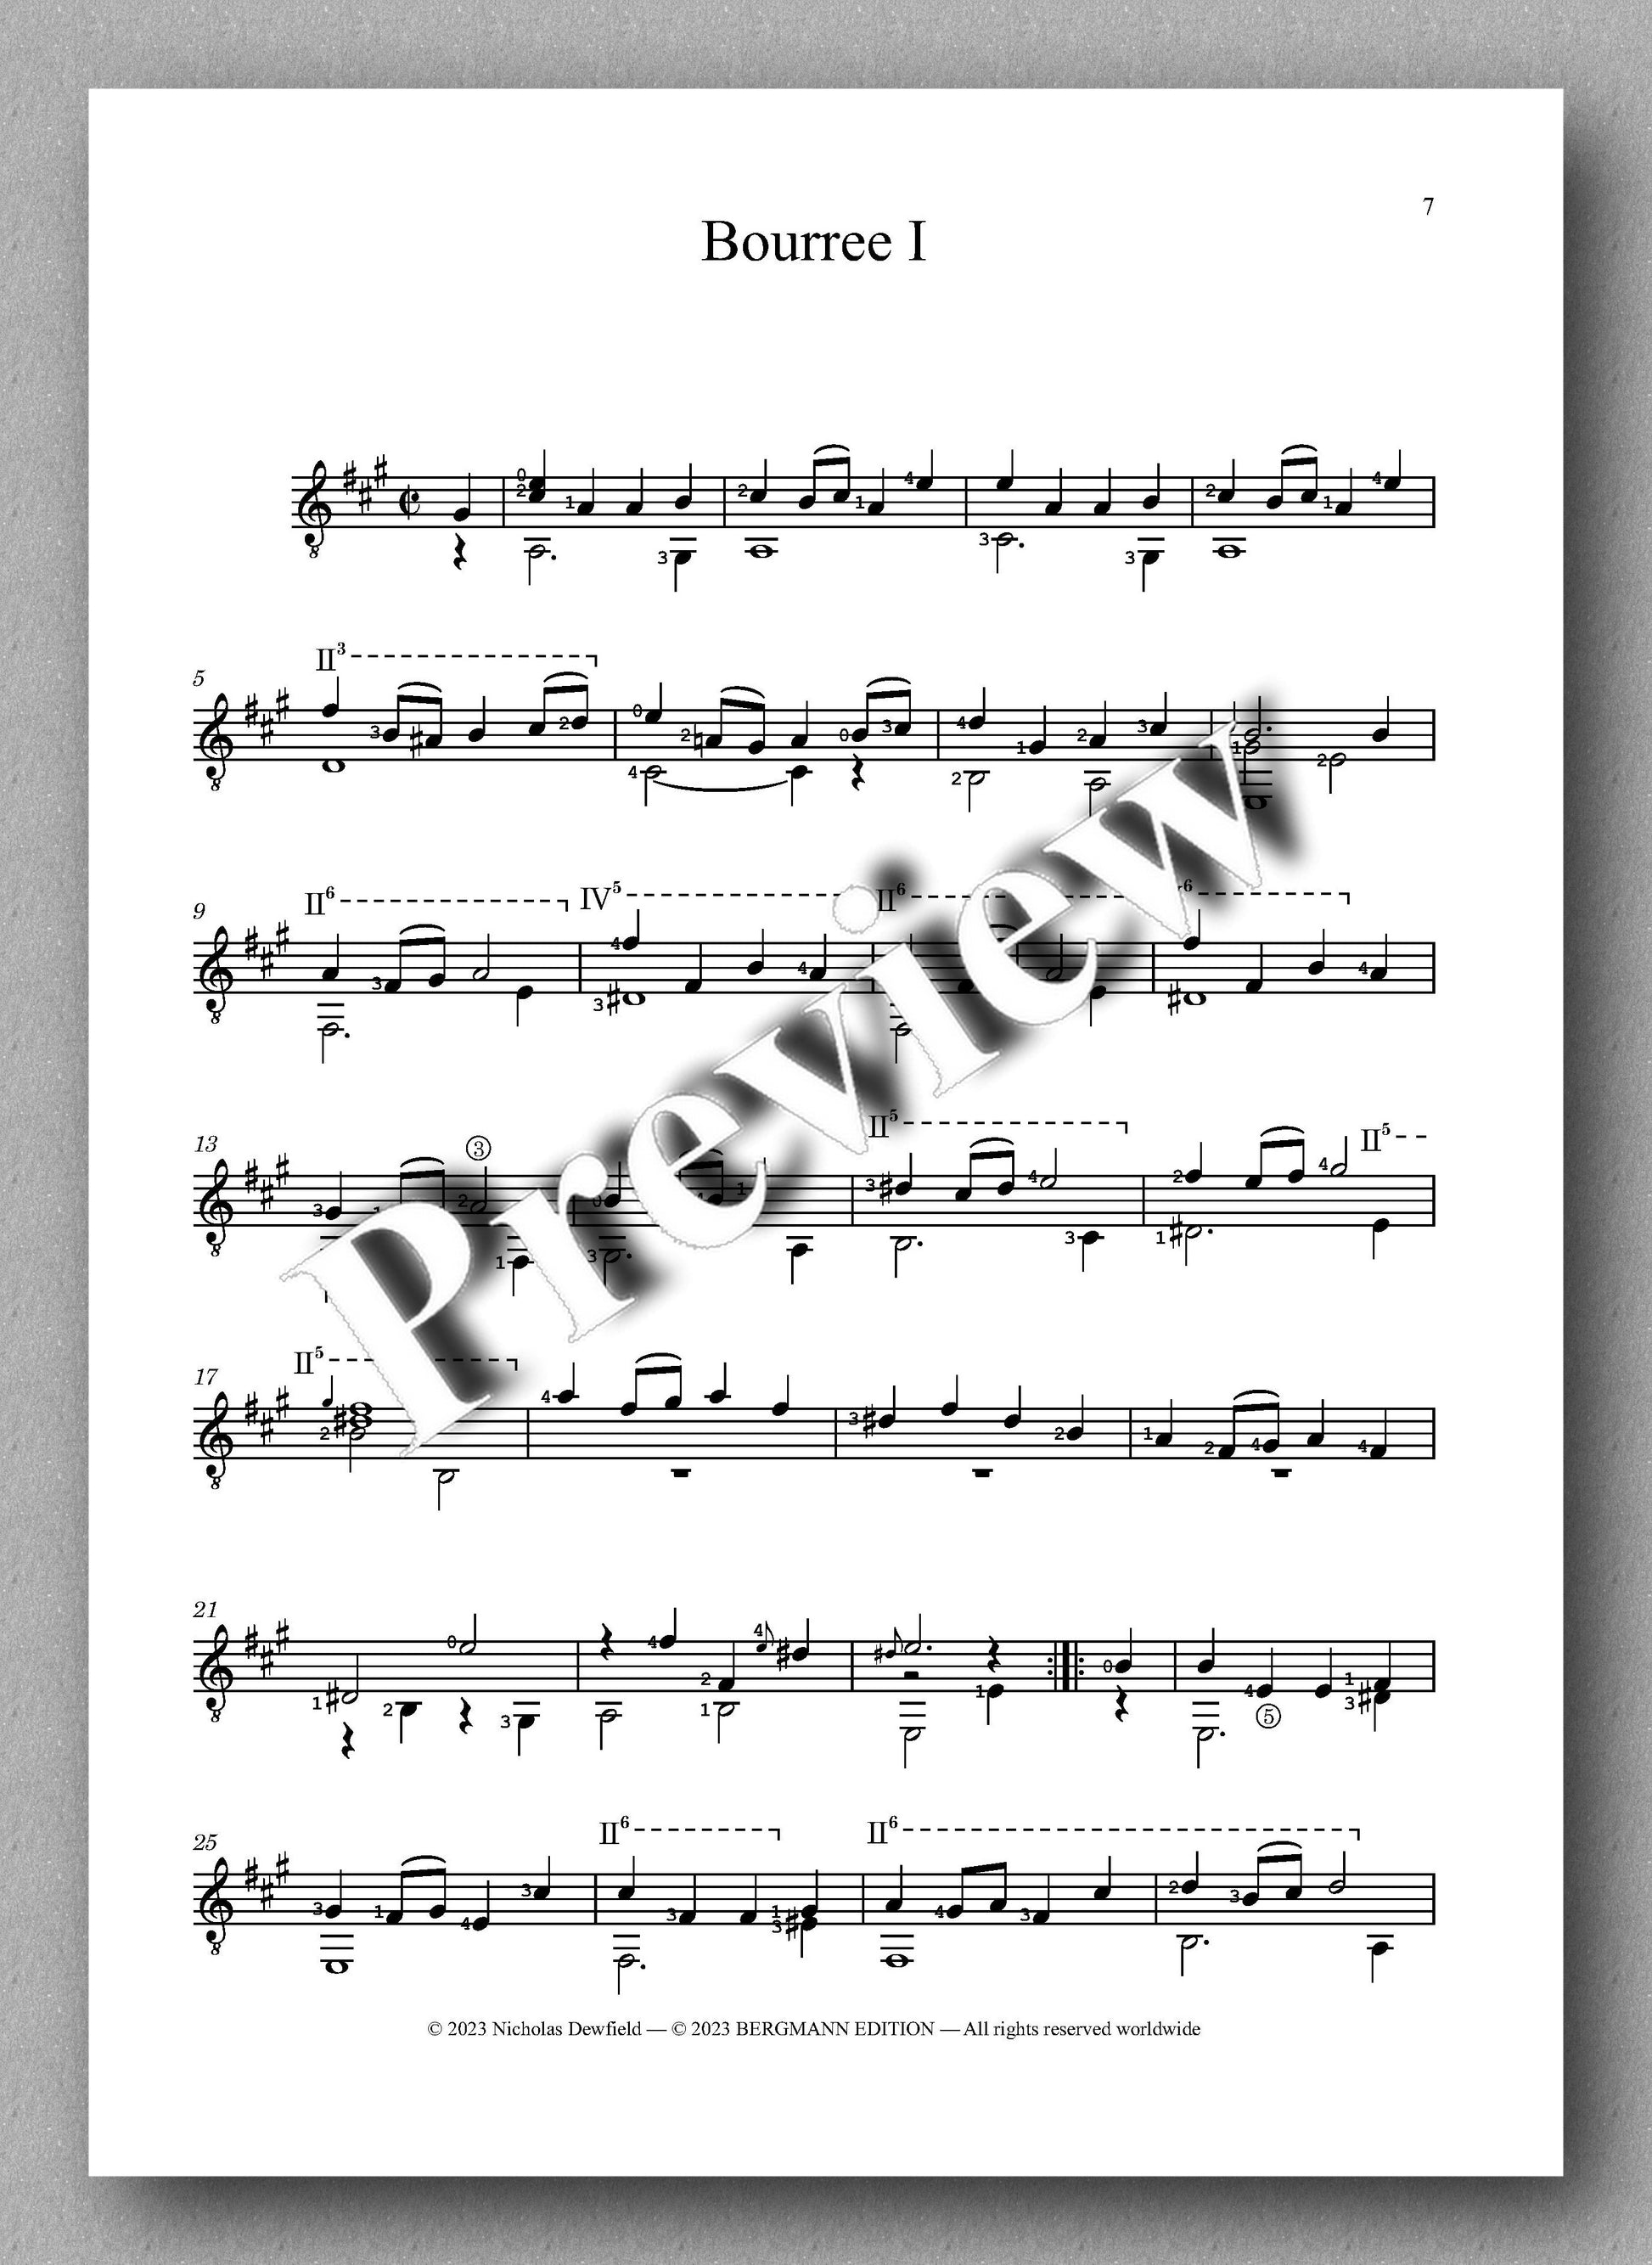 Weiss-Dewfield, Sonata No. 23 - preview of the music score 2